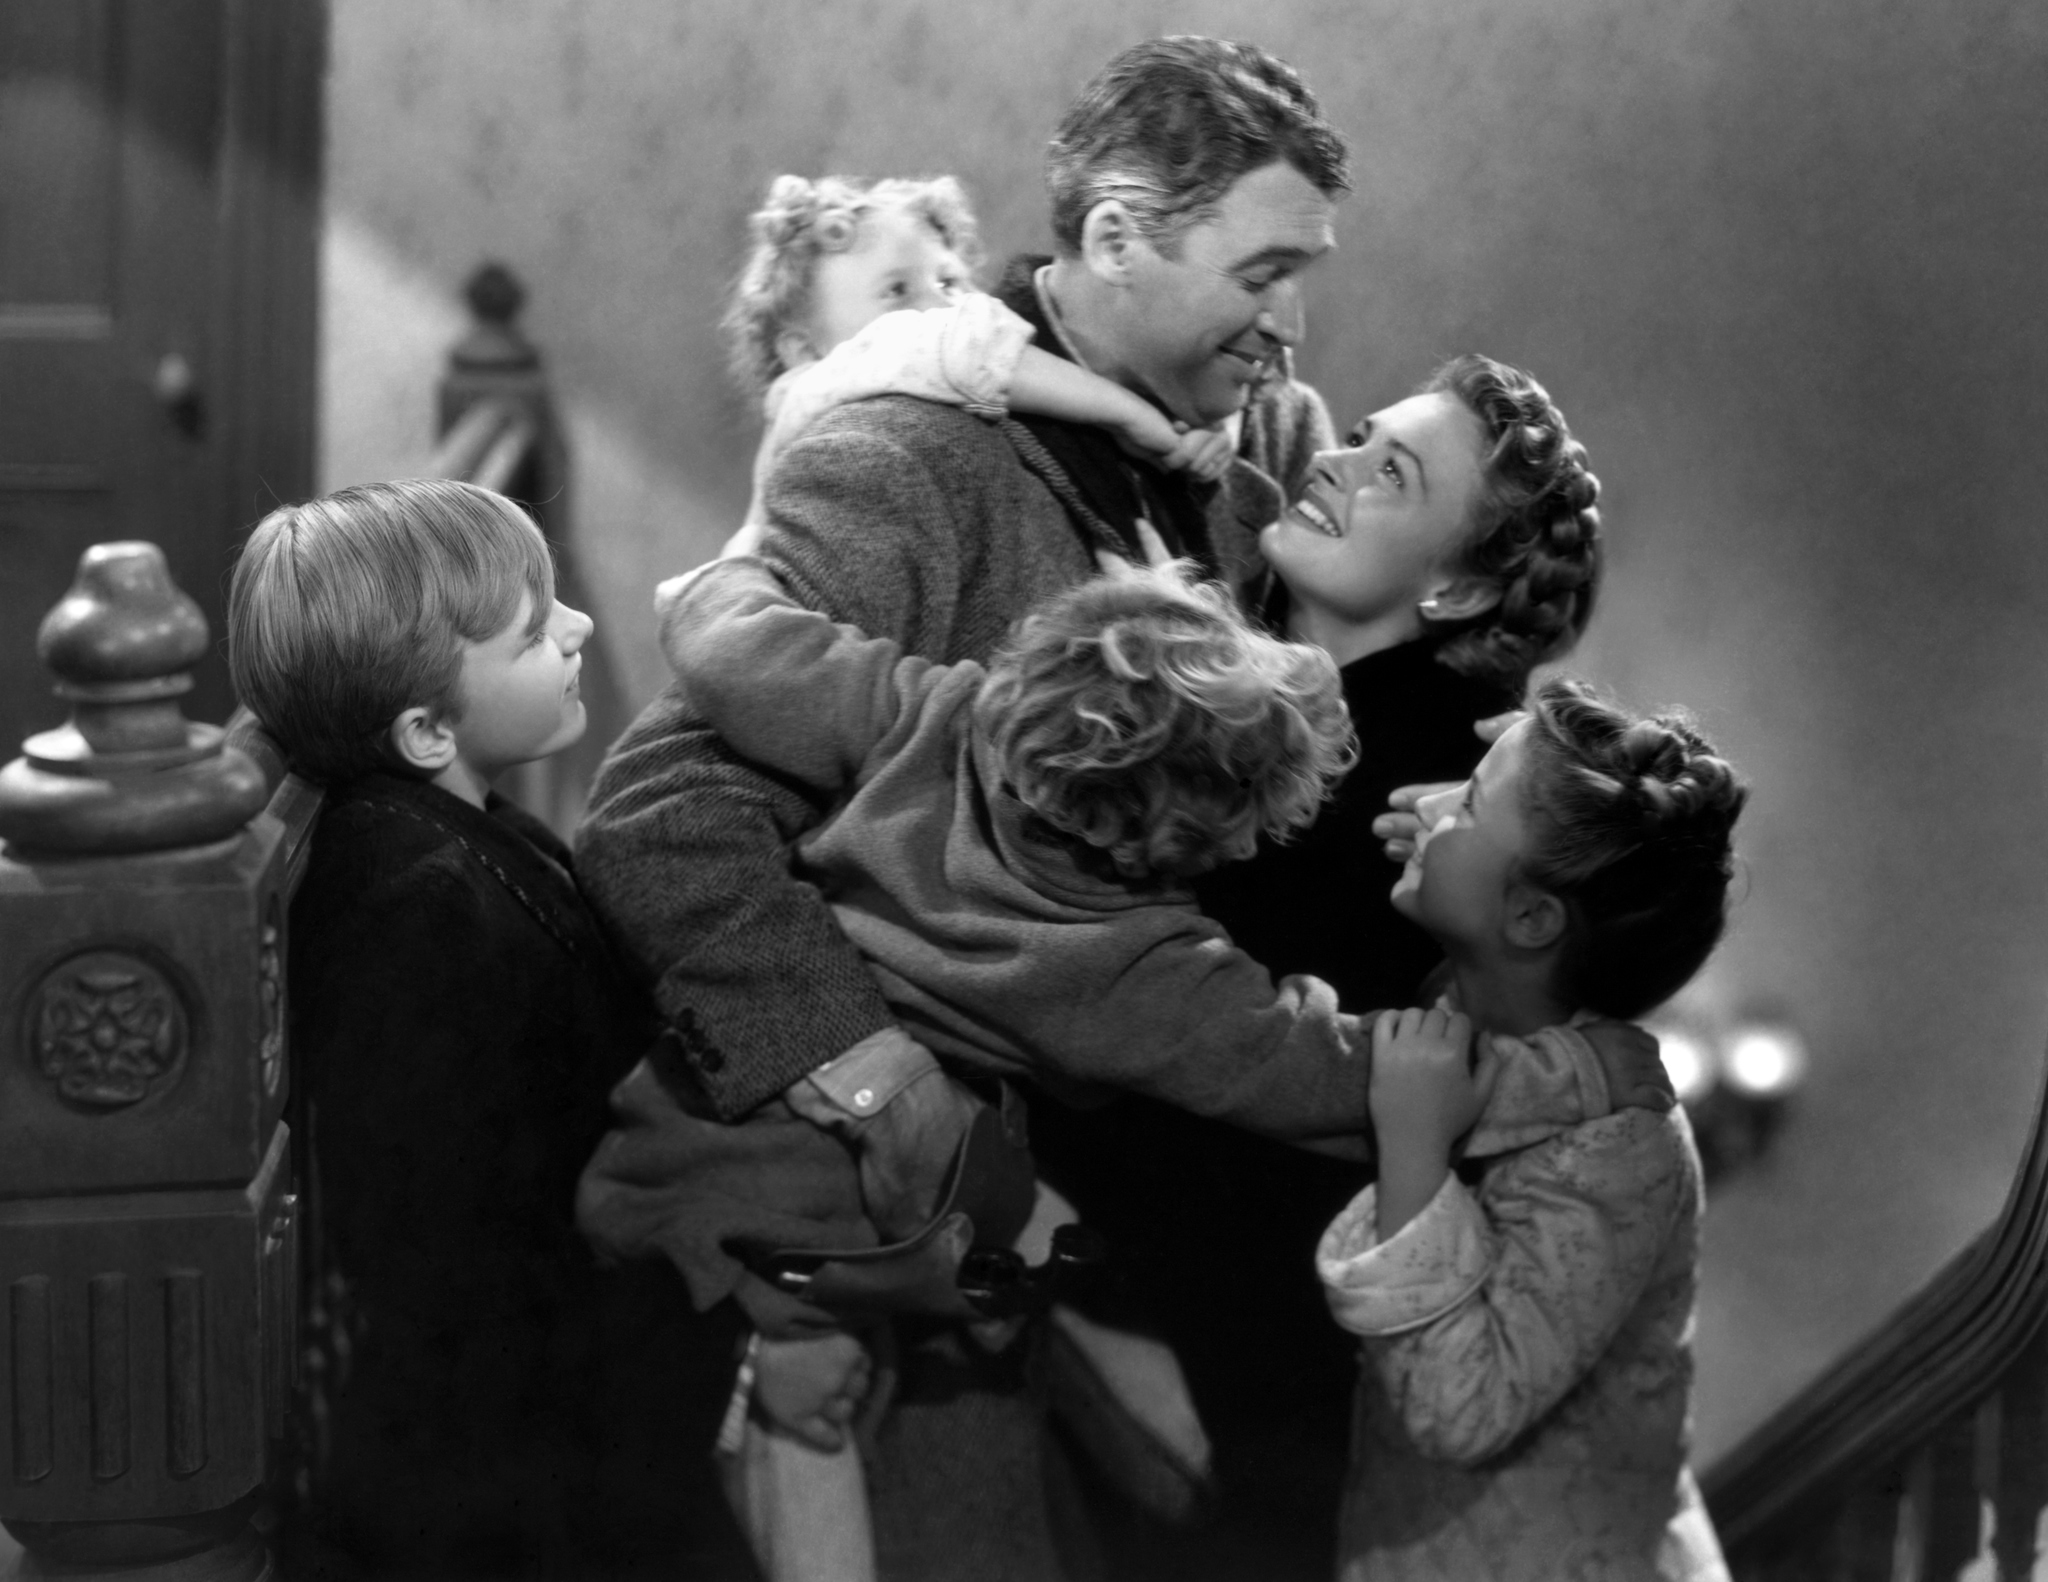 Image from "It's a Wonderful Life"